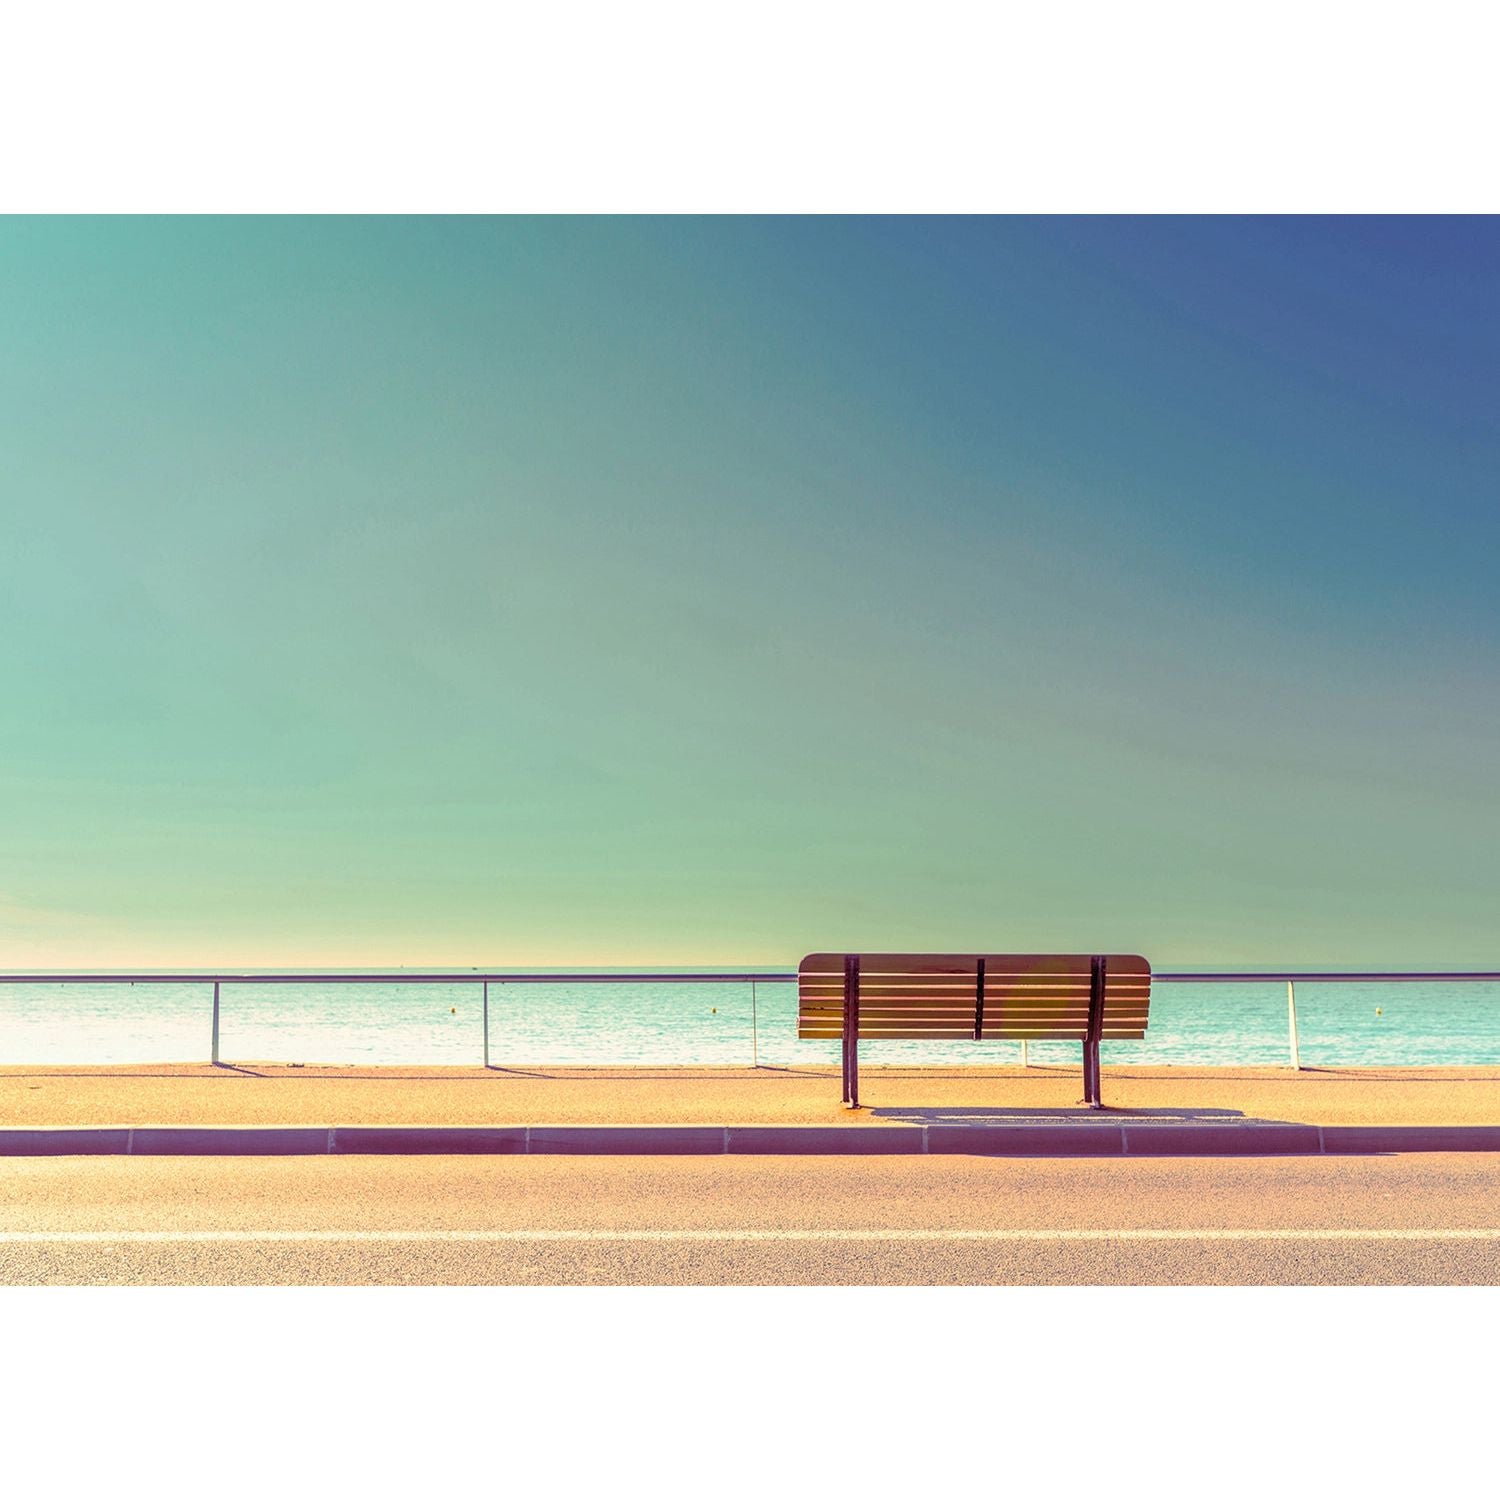 Seaside Serenity: Bench by the Calm Sea Wall Mural